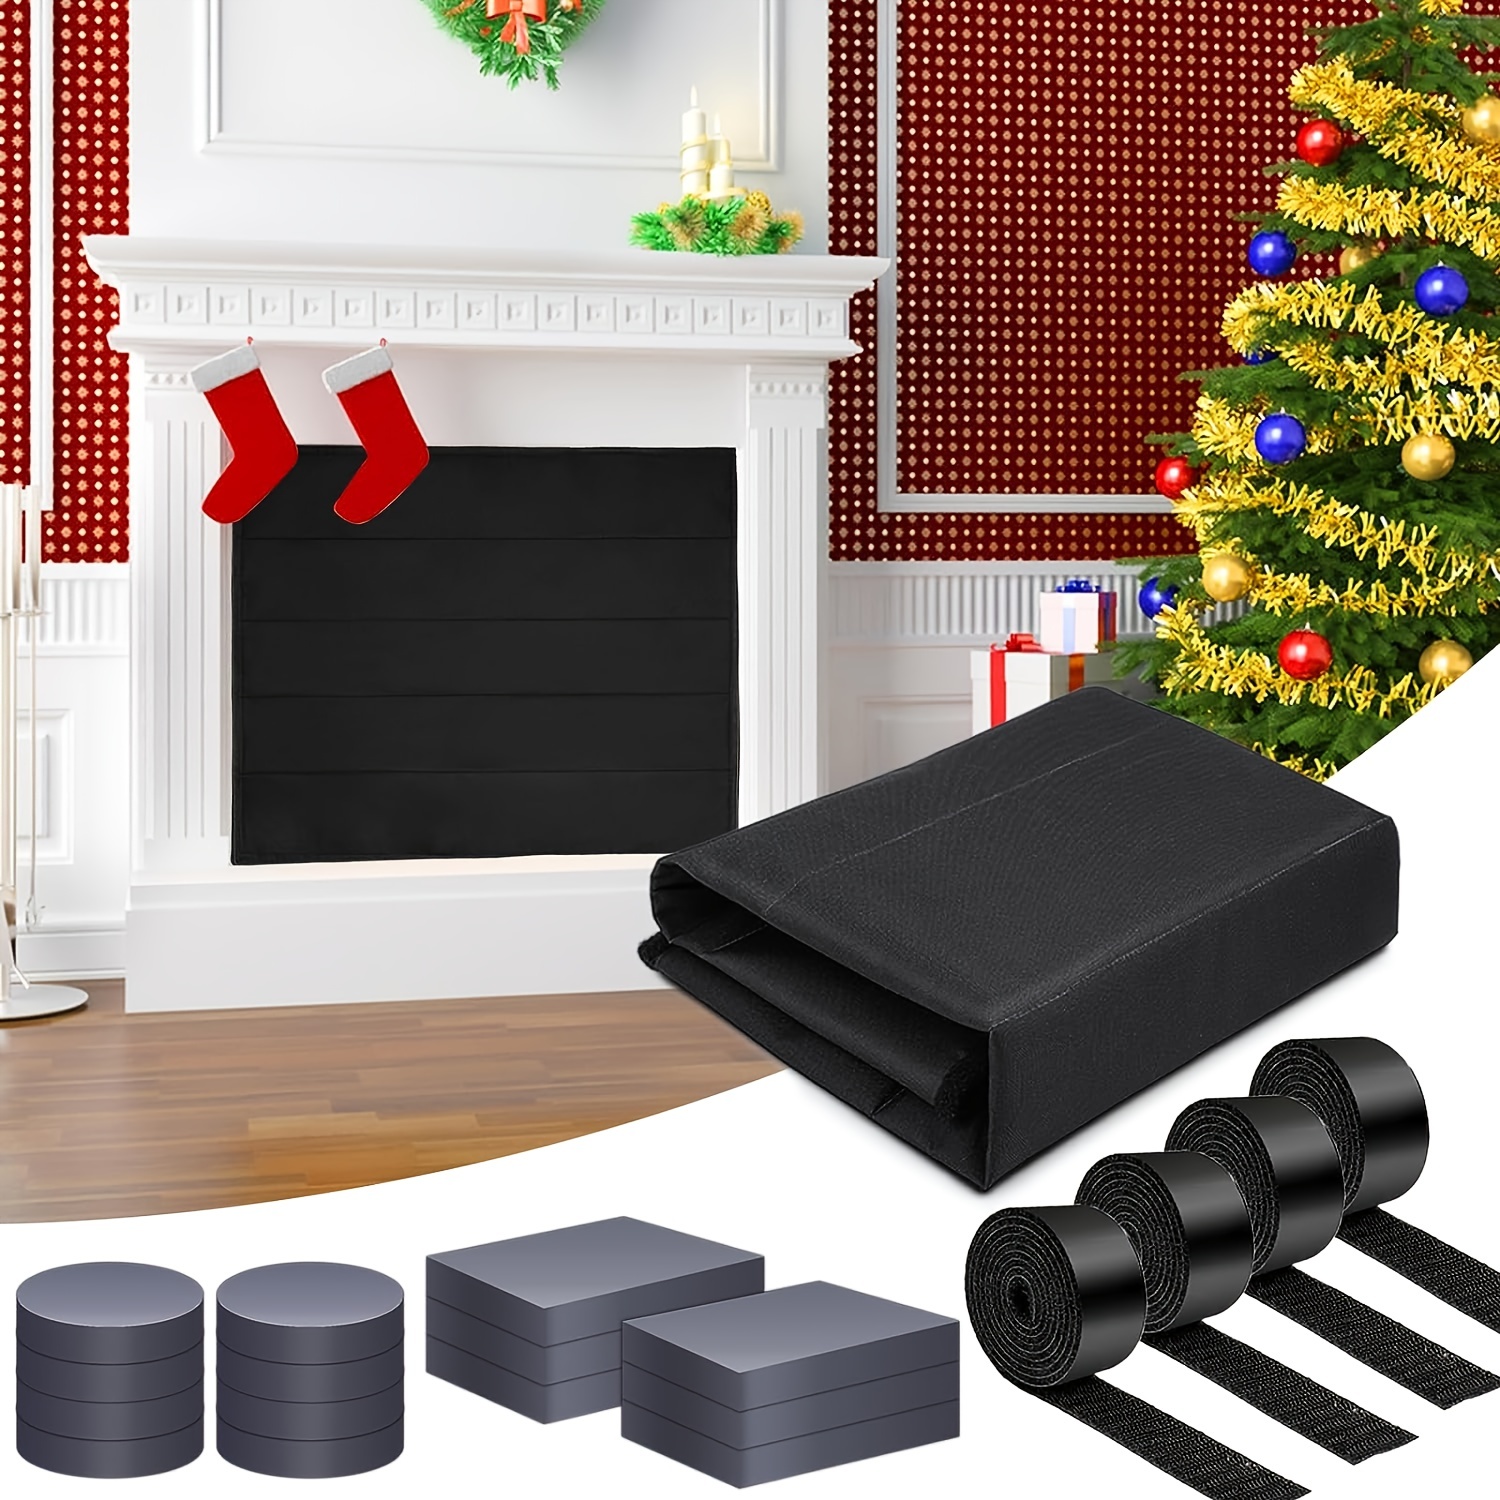 Magnetic Fireplace Cover for inside Fireplace Stops Heat Loss